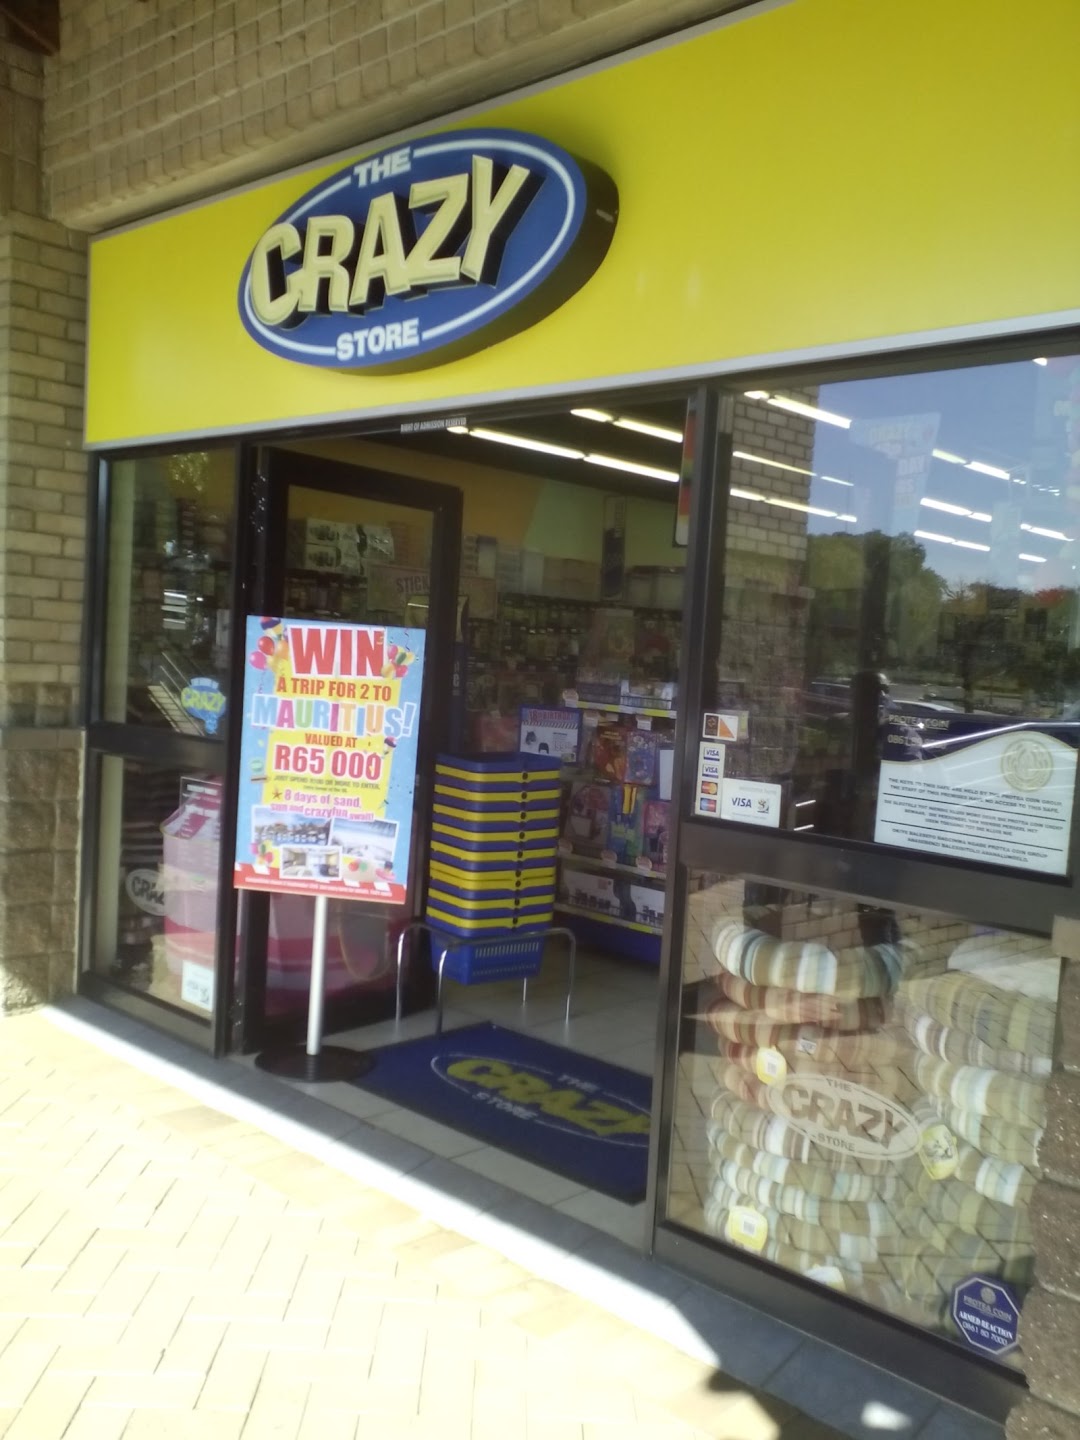 The Crazy Store Atterbury